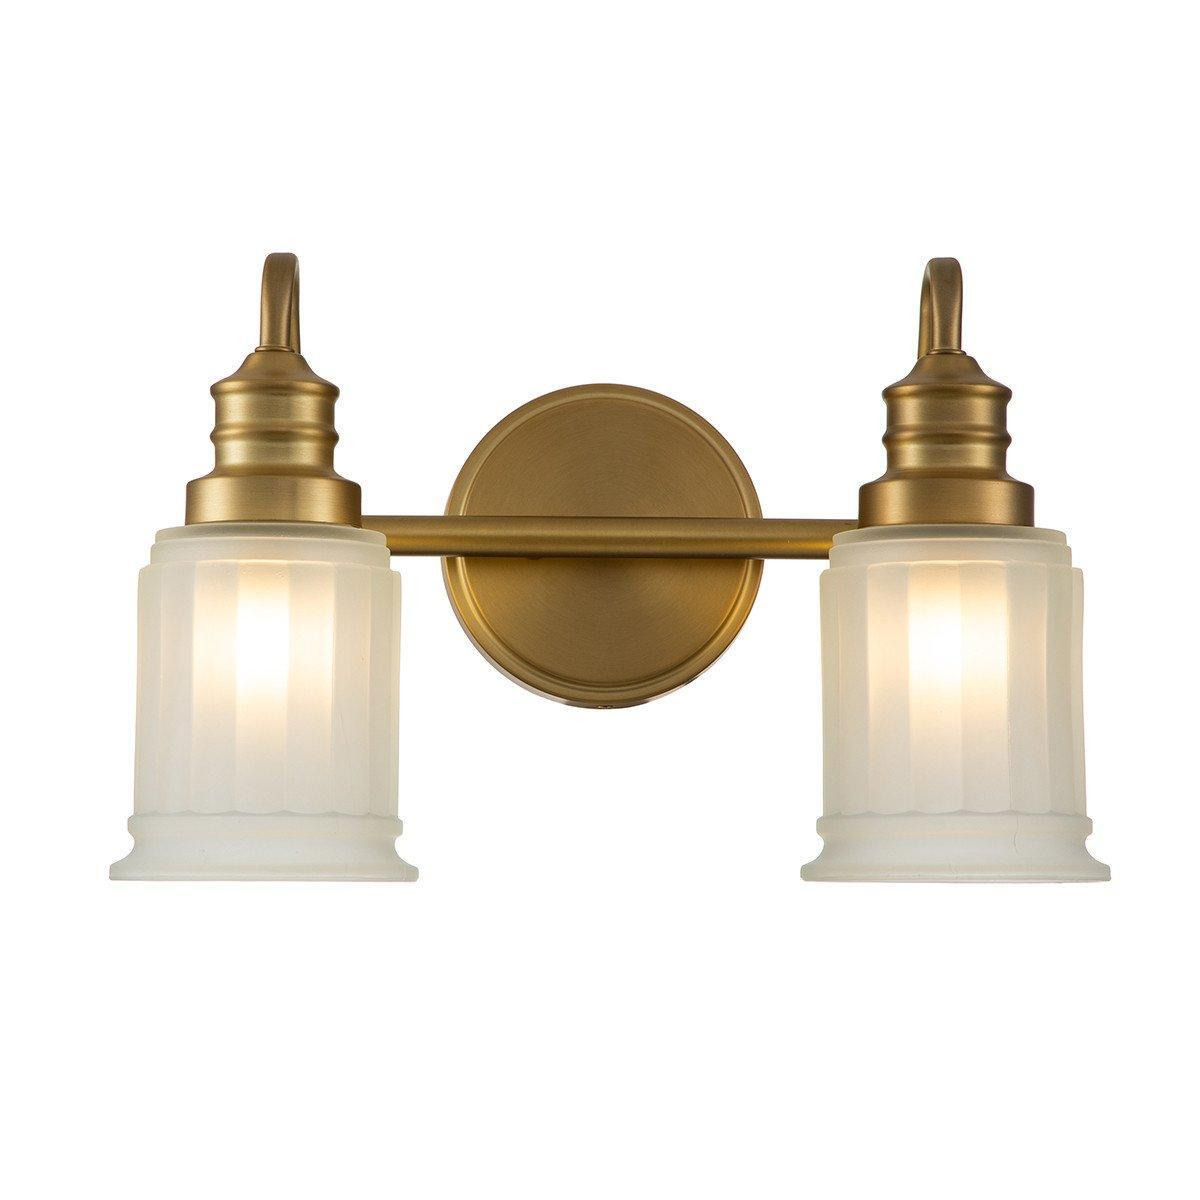 Quoizel Swell Wall Lamp Brushed Brass IP44 - image 1